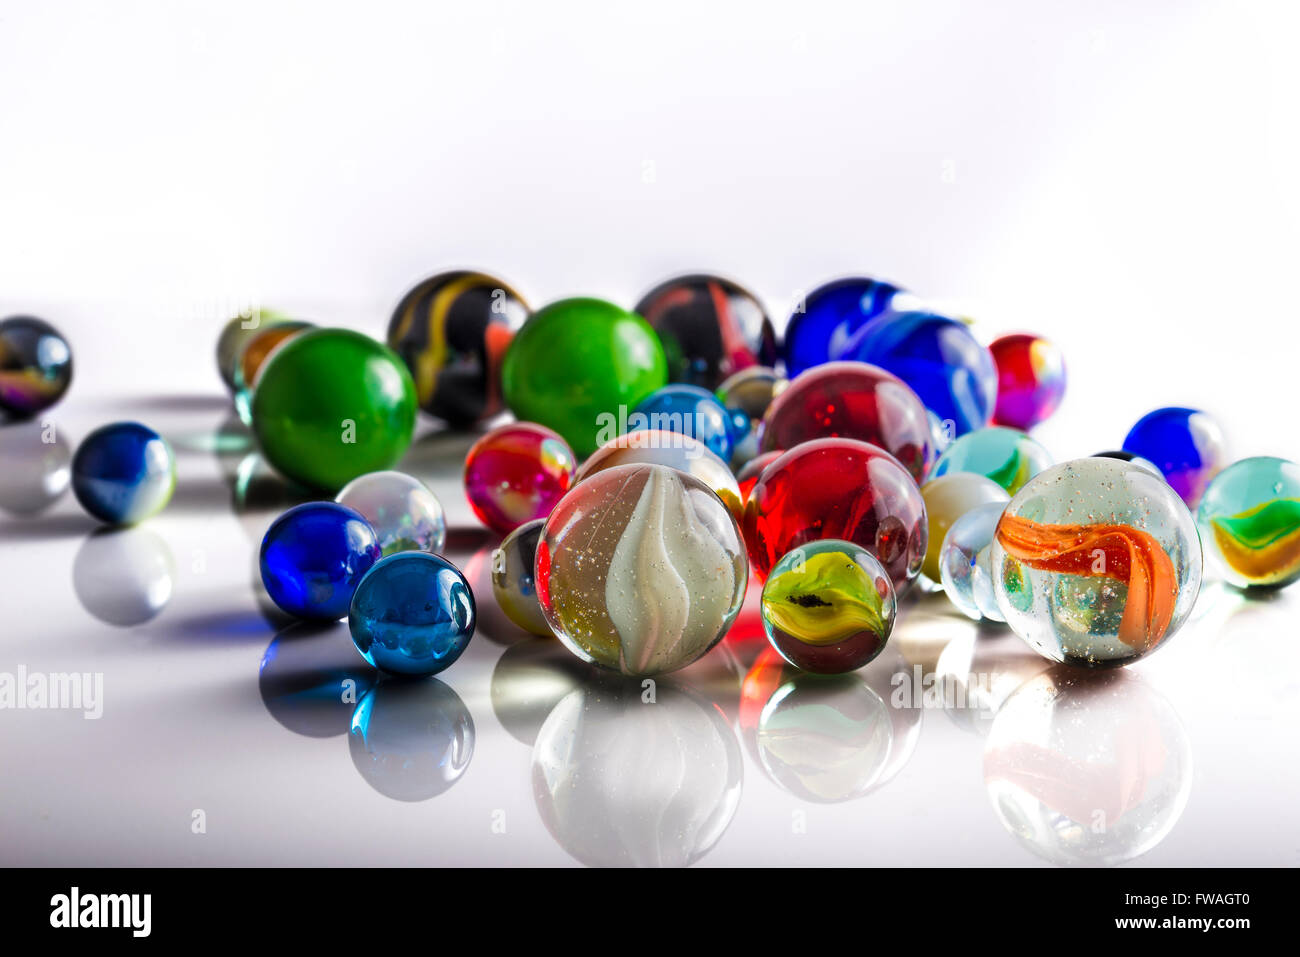 Group of mixed marbles on a reflective white surface Stock Photo